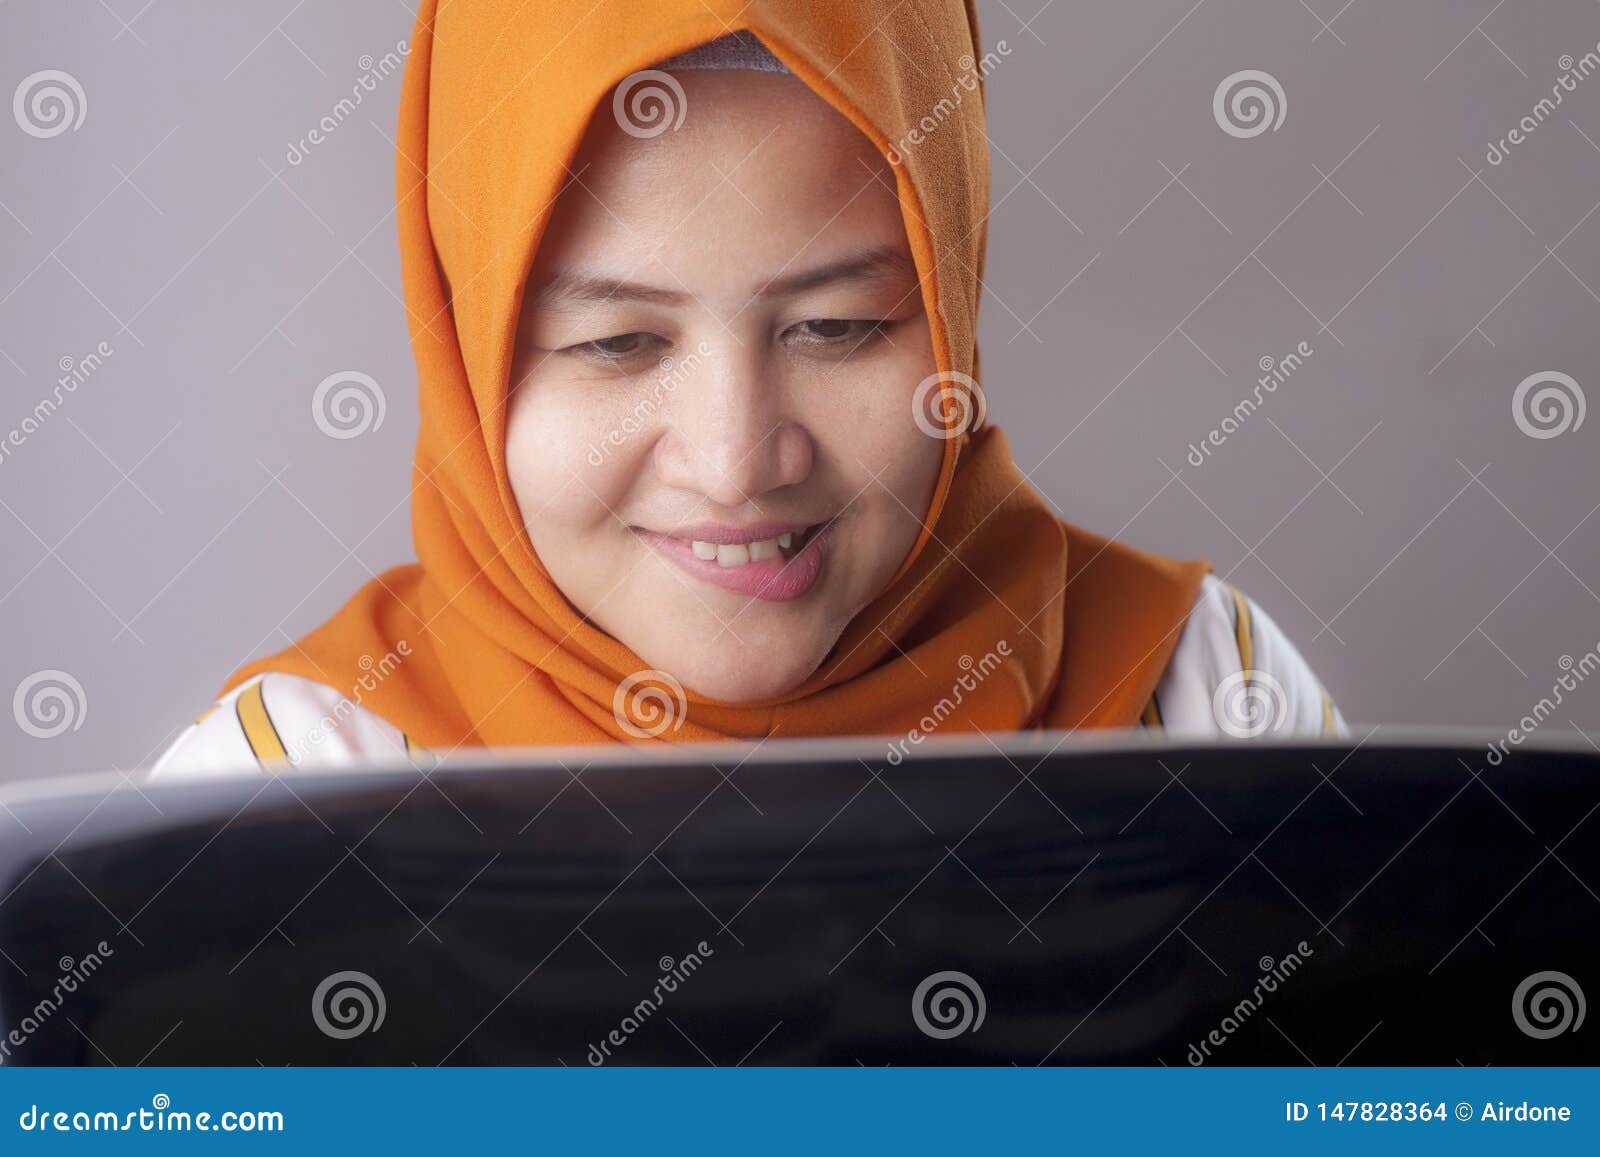 Girl Looking At Computer Porn - Woman With Naughty Expression Looking At Laptop Stock Photo ...